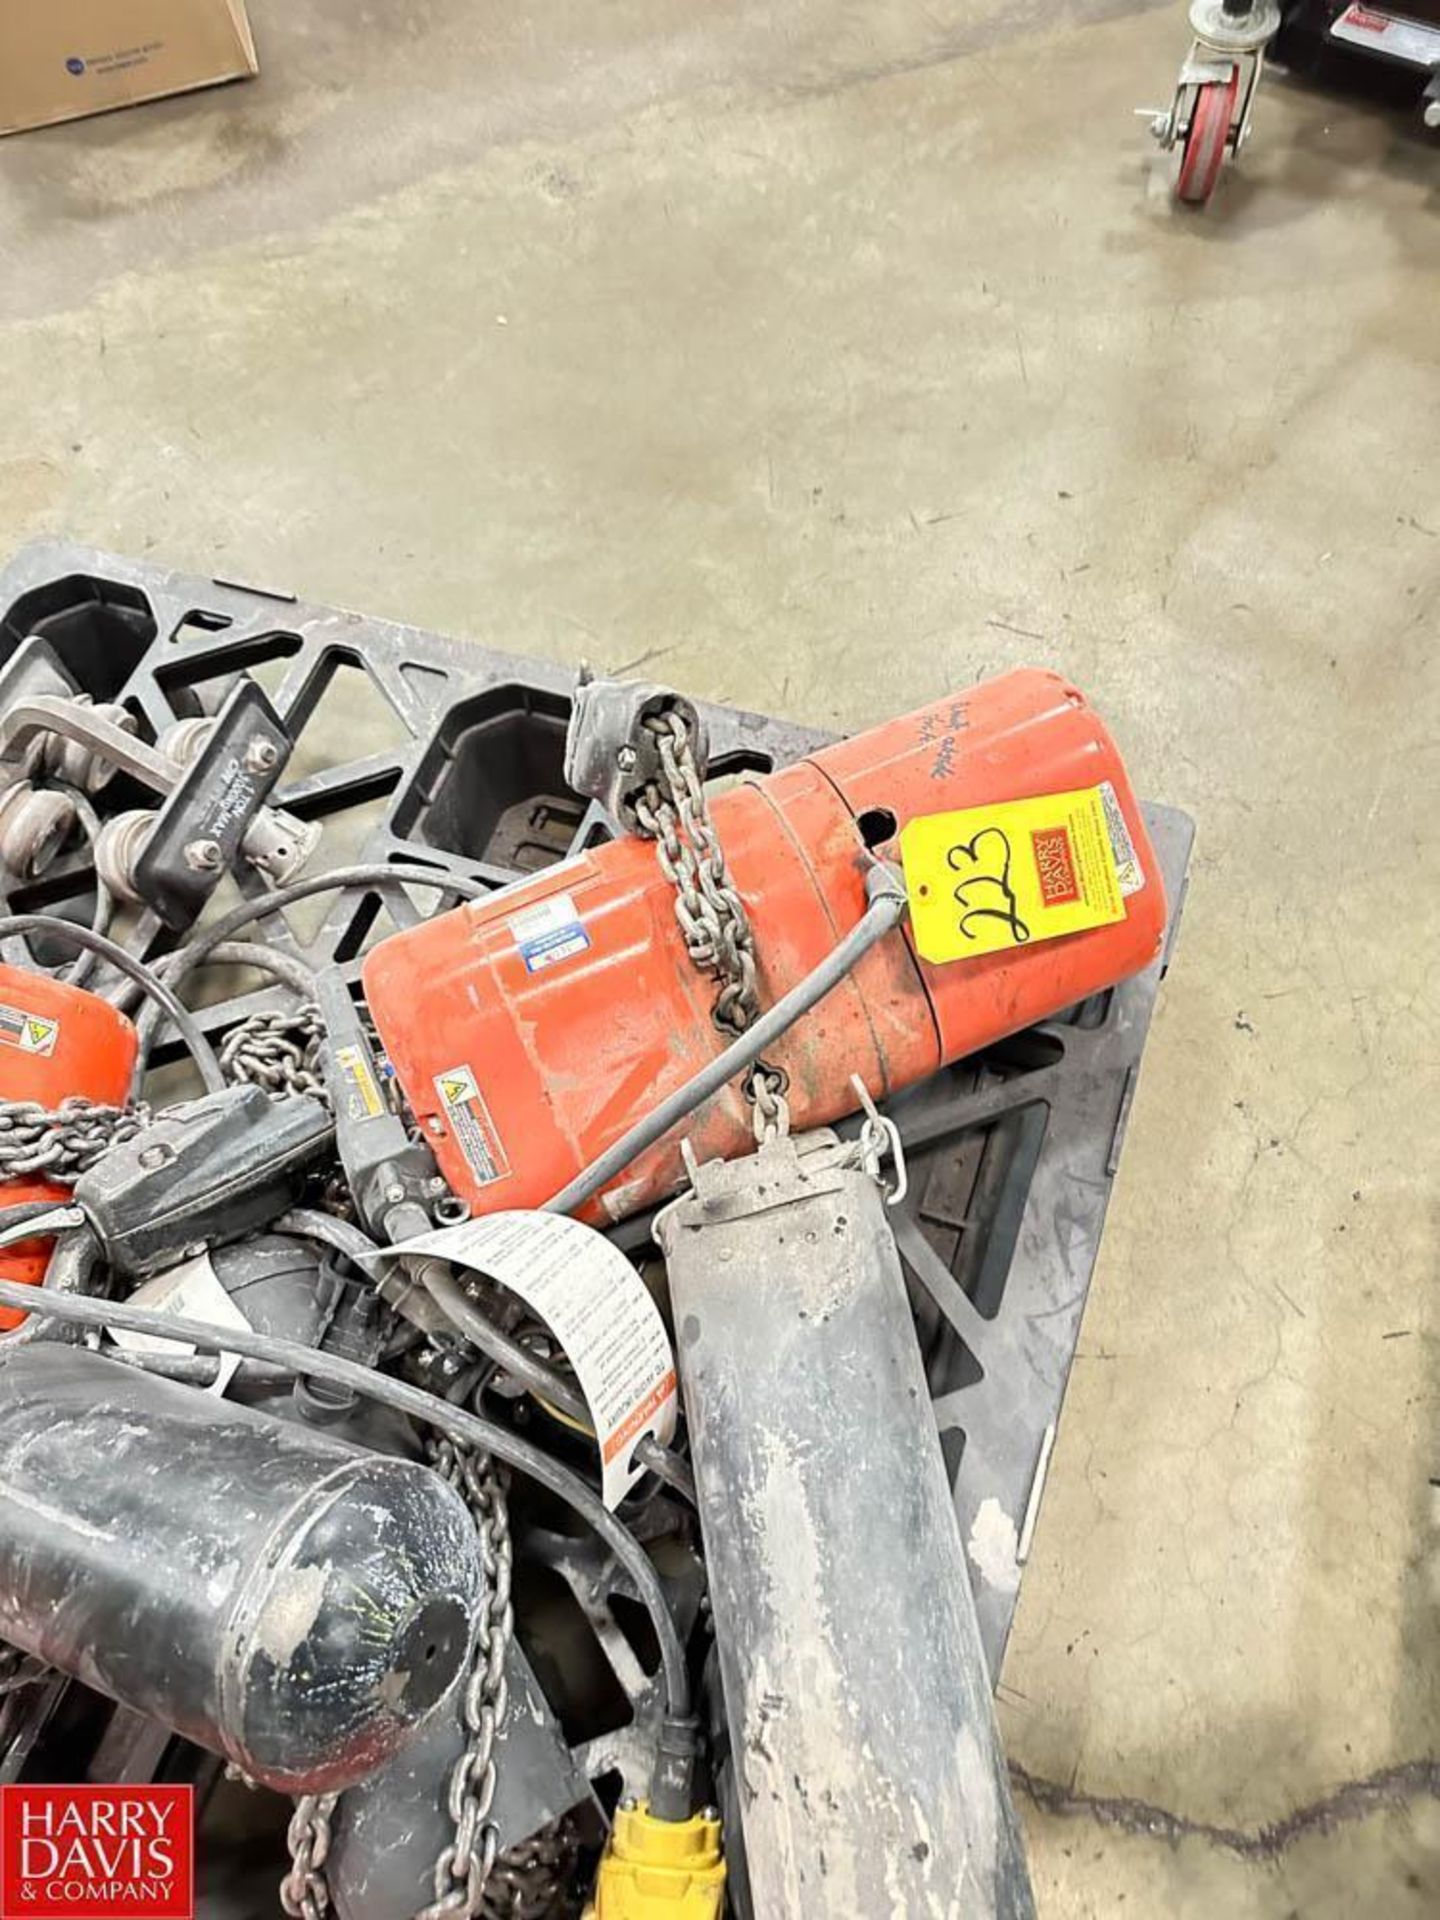 CM 1 Ton Electric Chain Hoist - Rigging Fee: $35 - Image 2 of 2